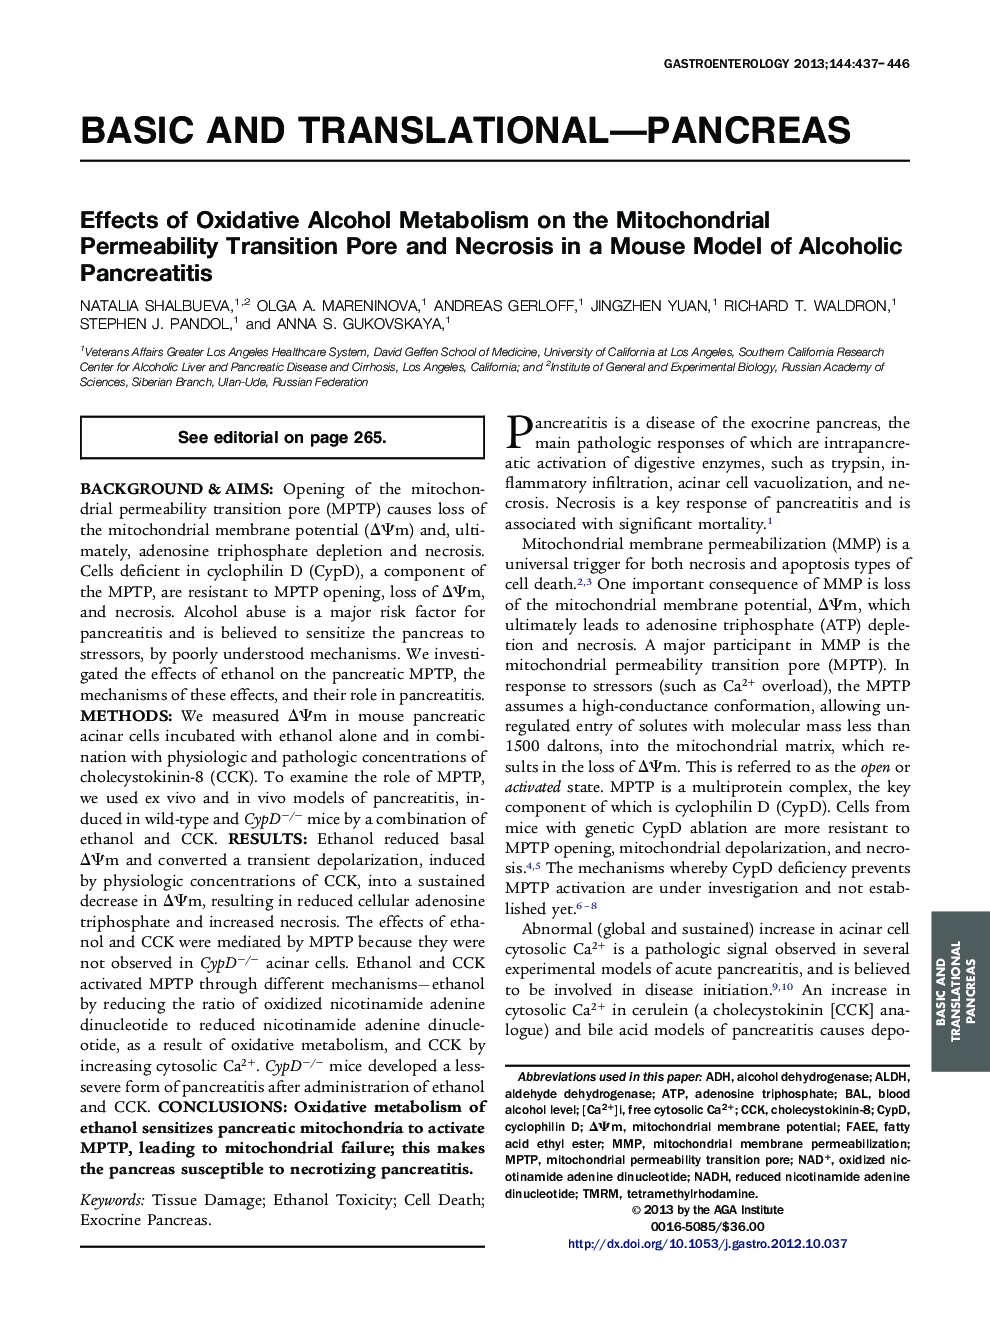 Effects of Oxidative Alcohol Metabolism on the Mitochondrial Permeability Transition Pore and Necrosis in a Mouse Model of Alcoholic Pancreatitis